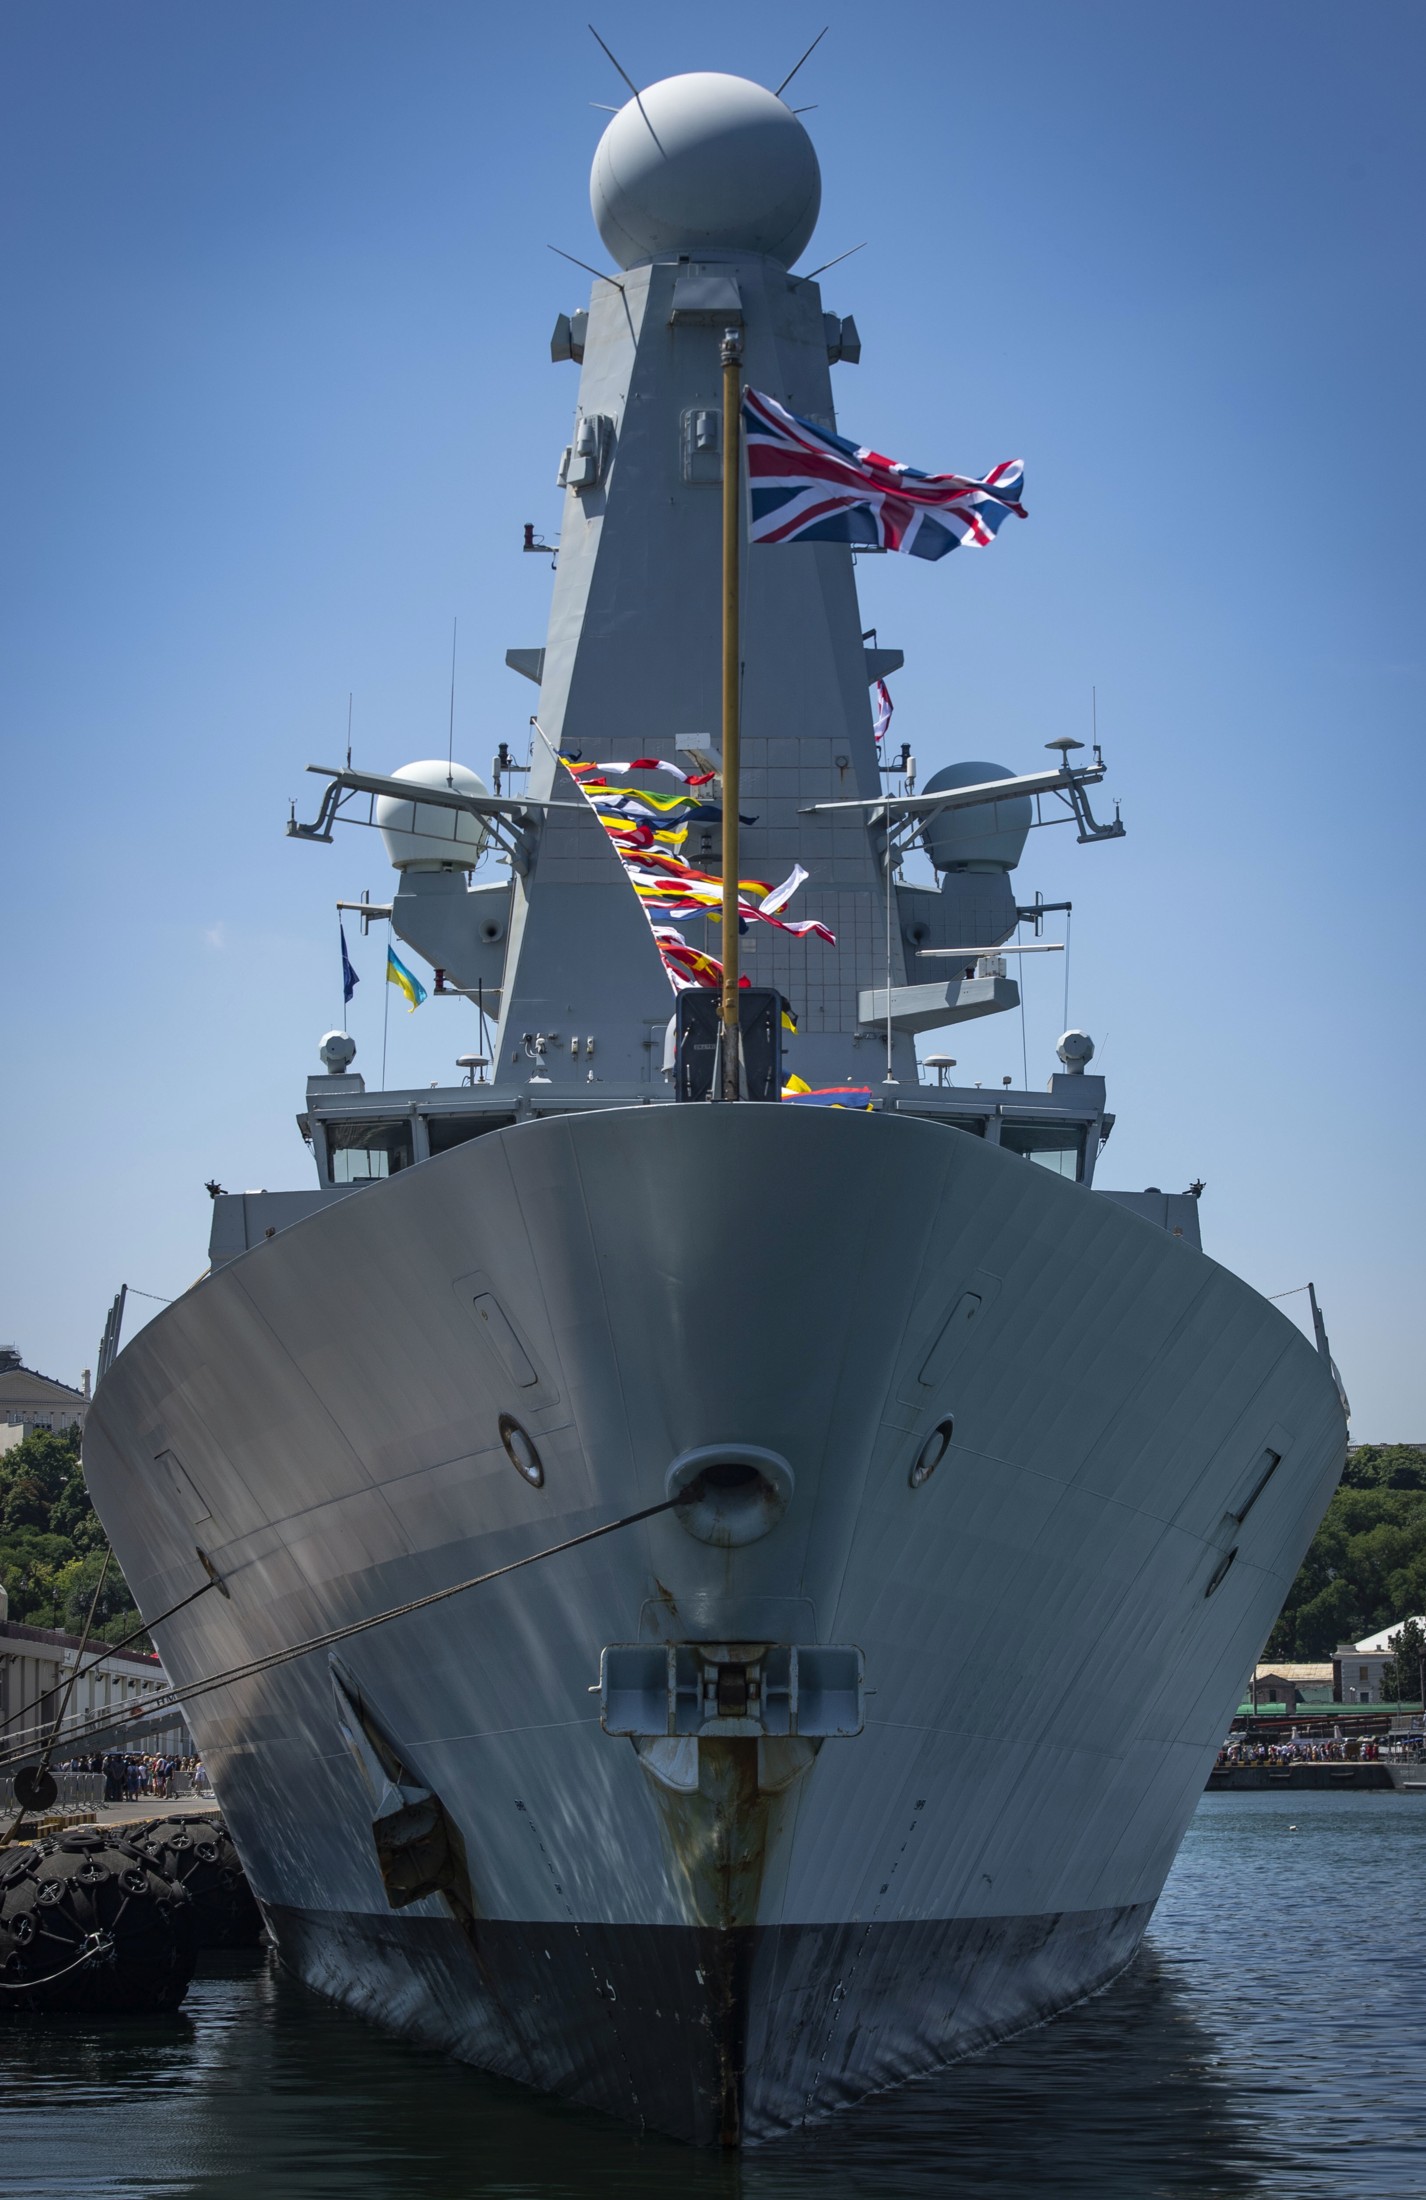 d37 hms duncan d-37 type 45 daring class guided missile destroyer ddg royal navy sea viper 22